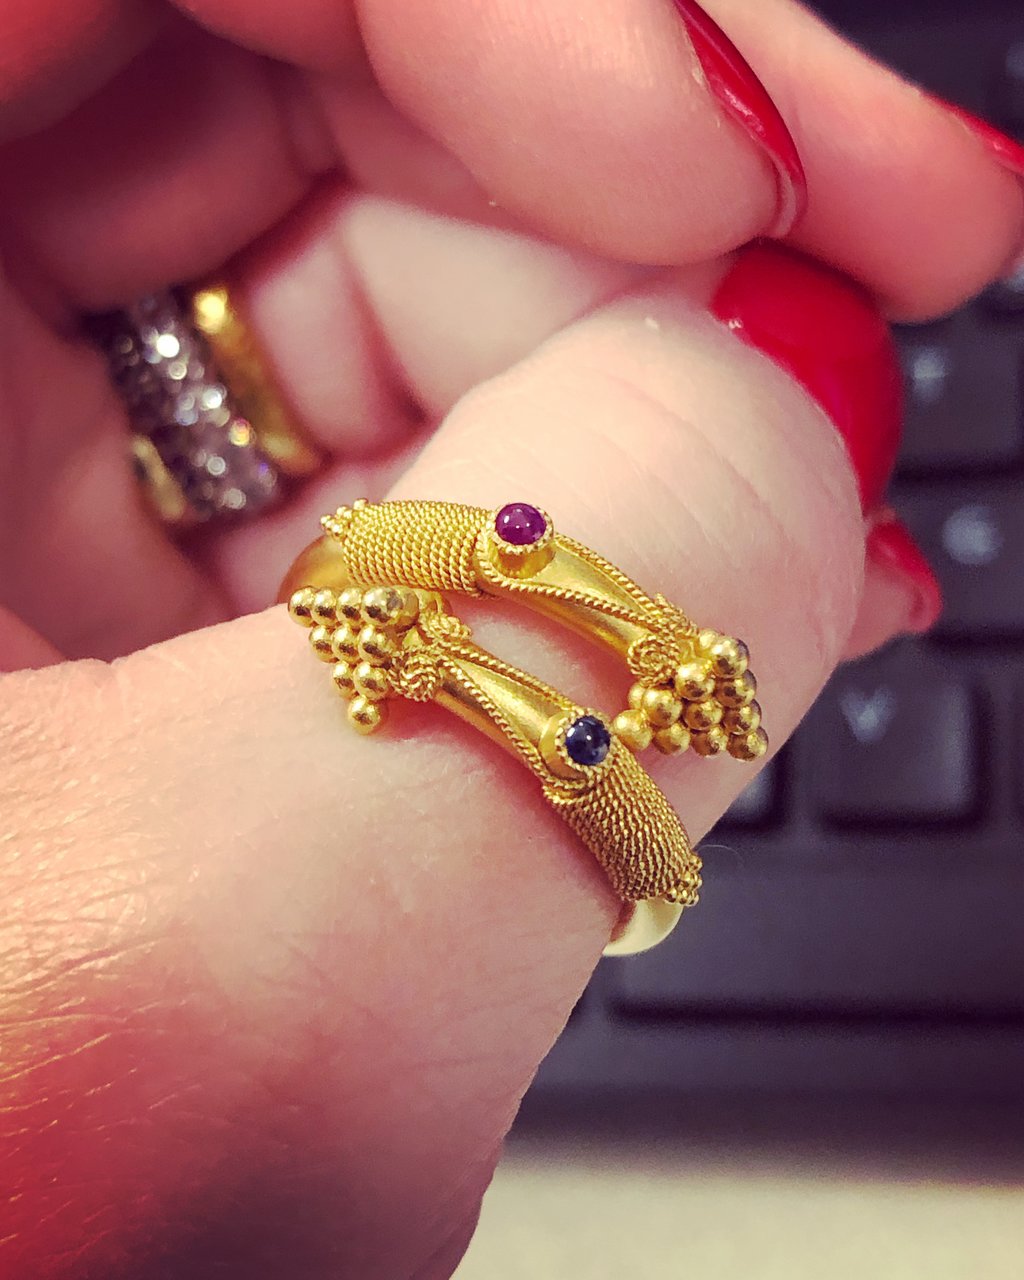 Caolsen started a thread about souvenir jewelry from vacation destinations, featuring her amazing ring from Greece! Other PriceScoper's certainly also mark fab vacations with new jewelry and this thread is a special place to show those off!